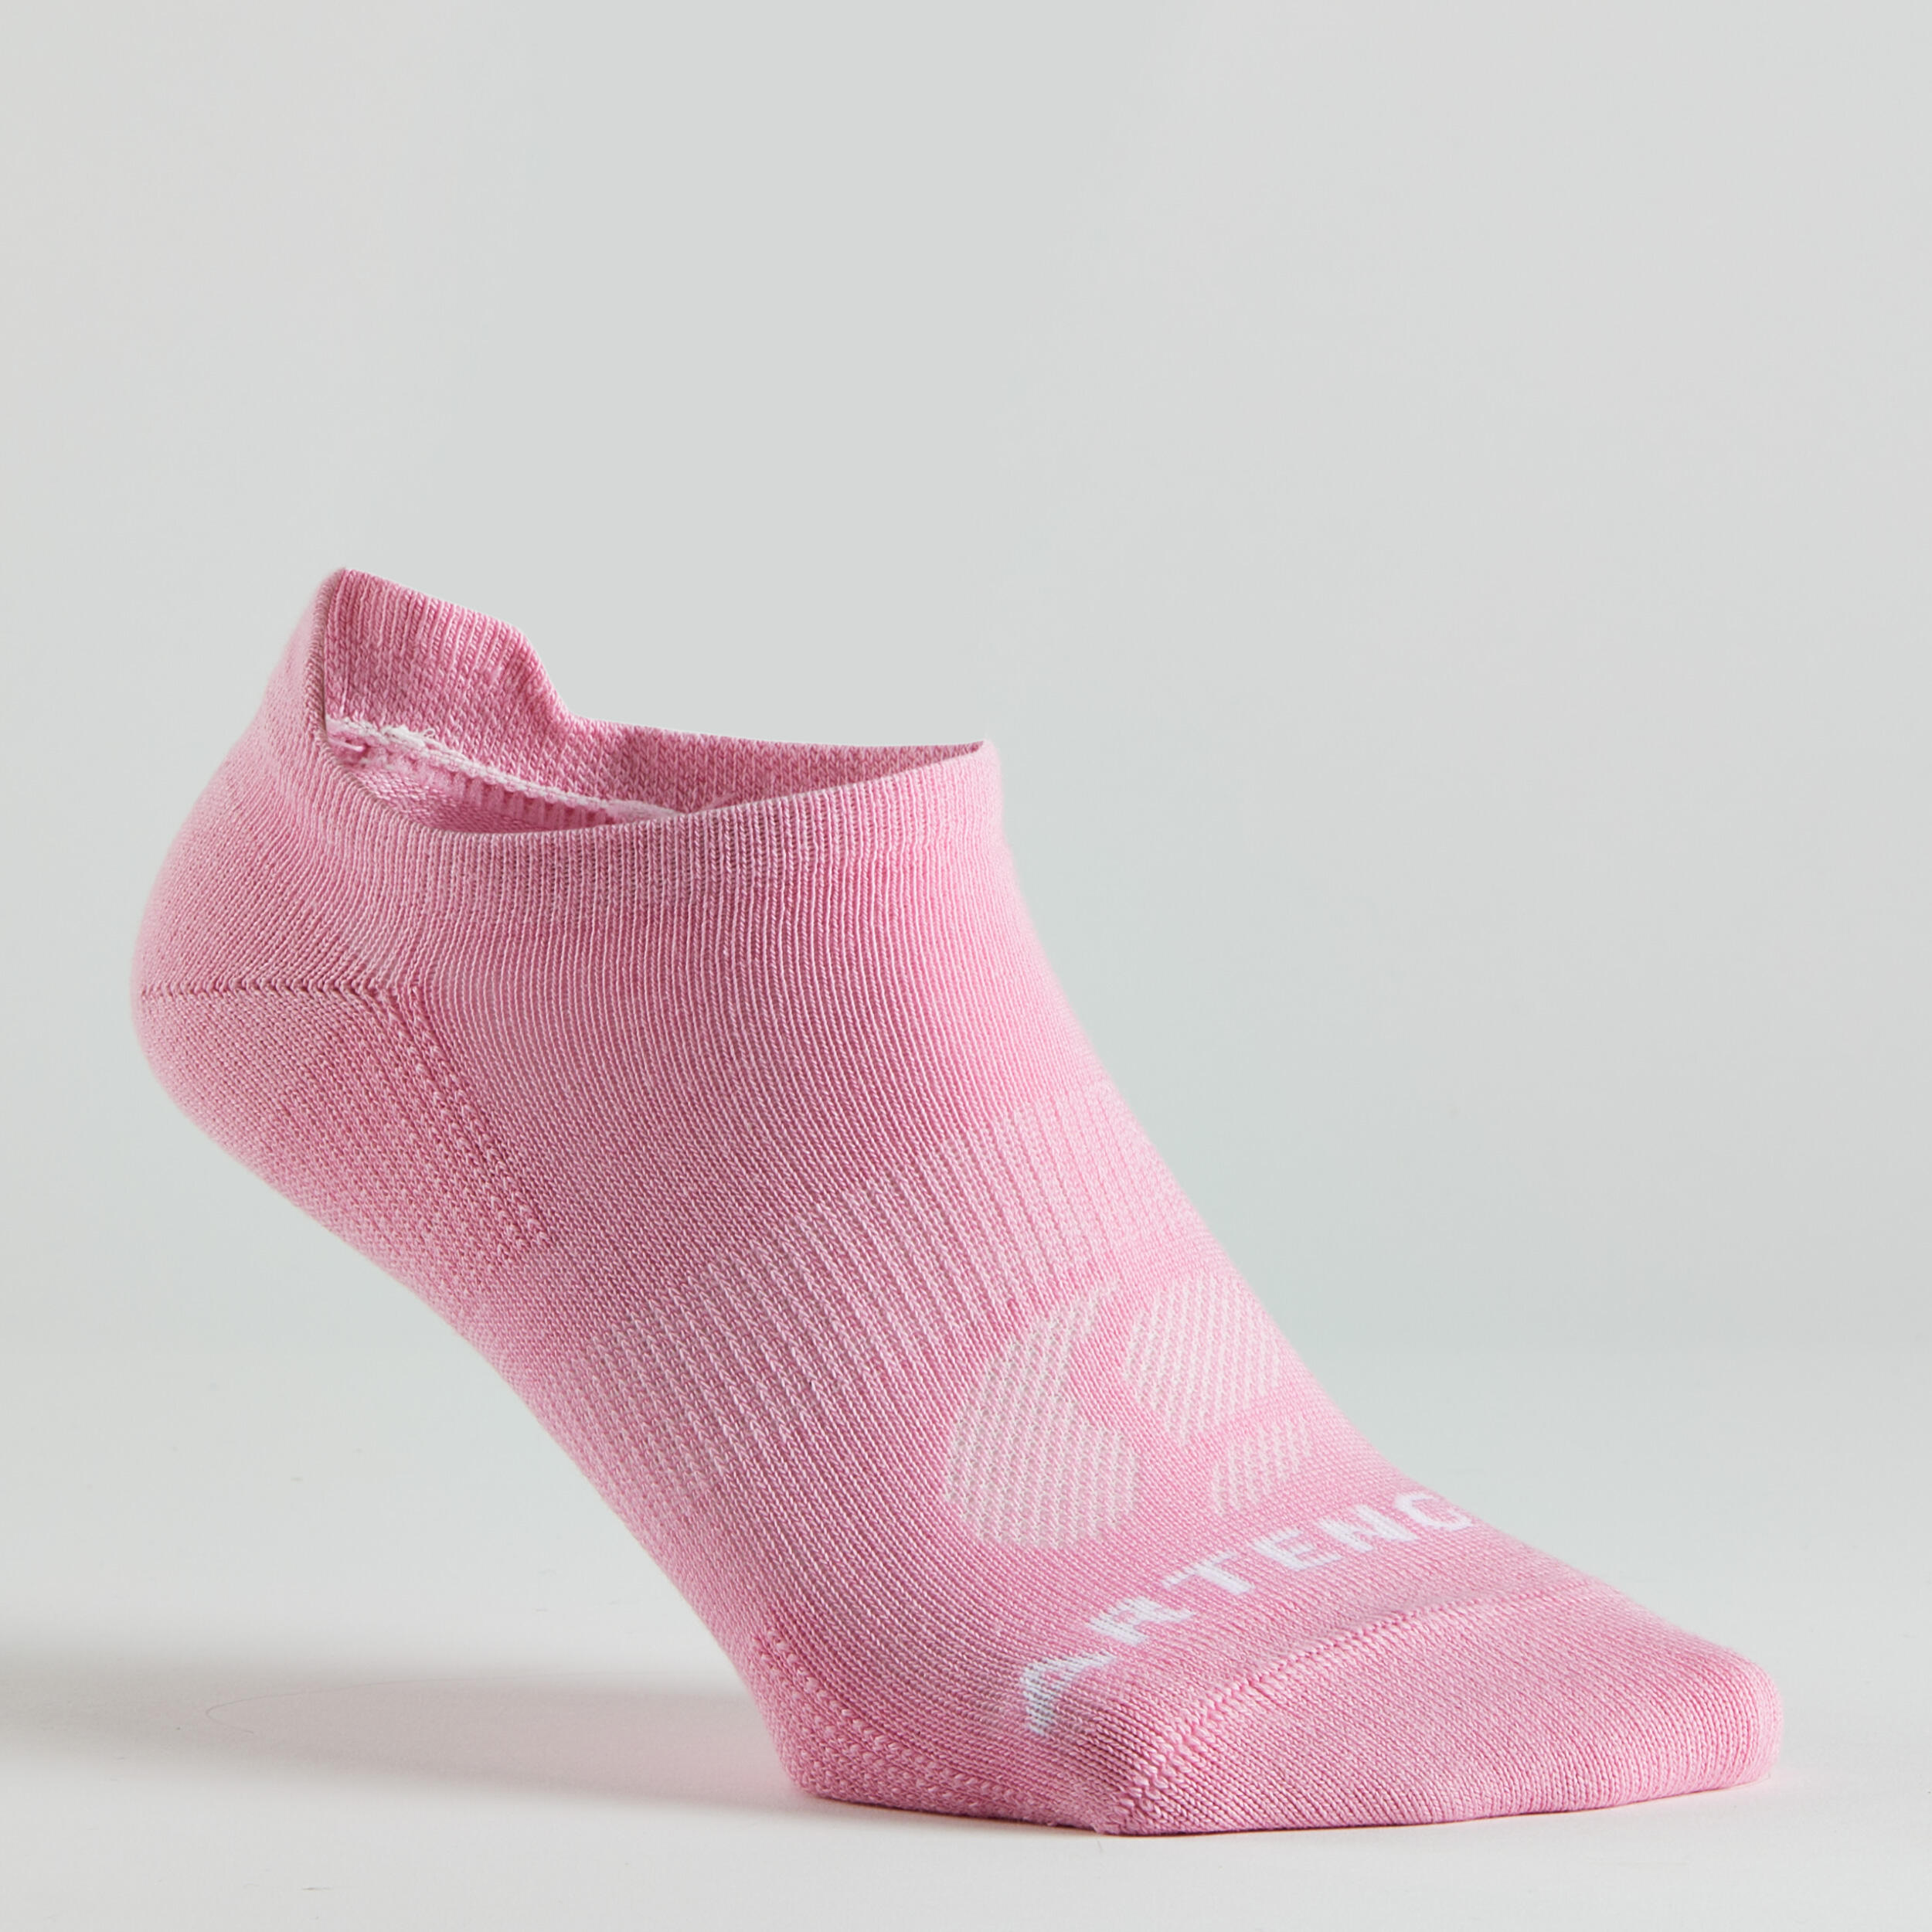 Low Sports Socks RS 160 Tri-Pack - Apricot/Pink/Navy 3/14